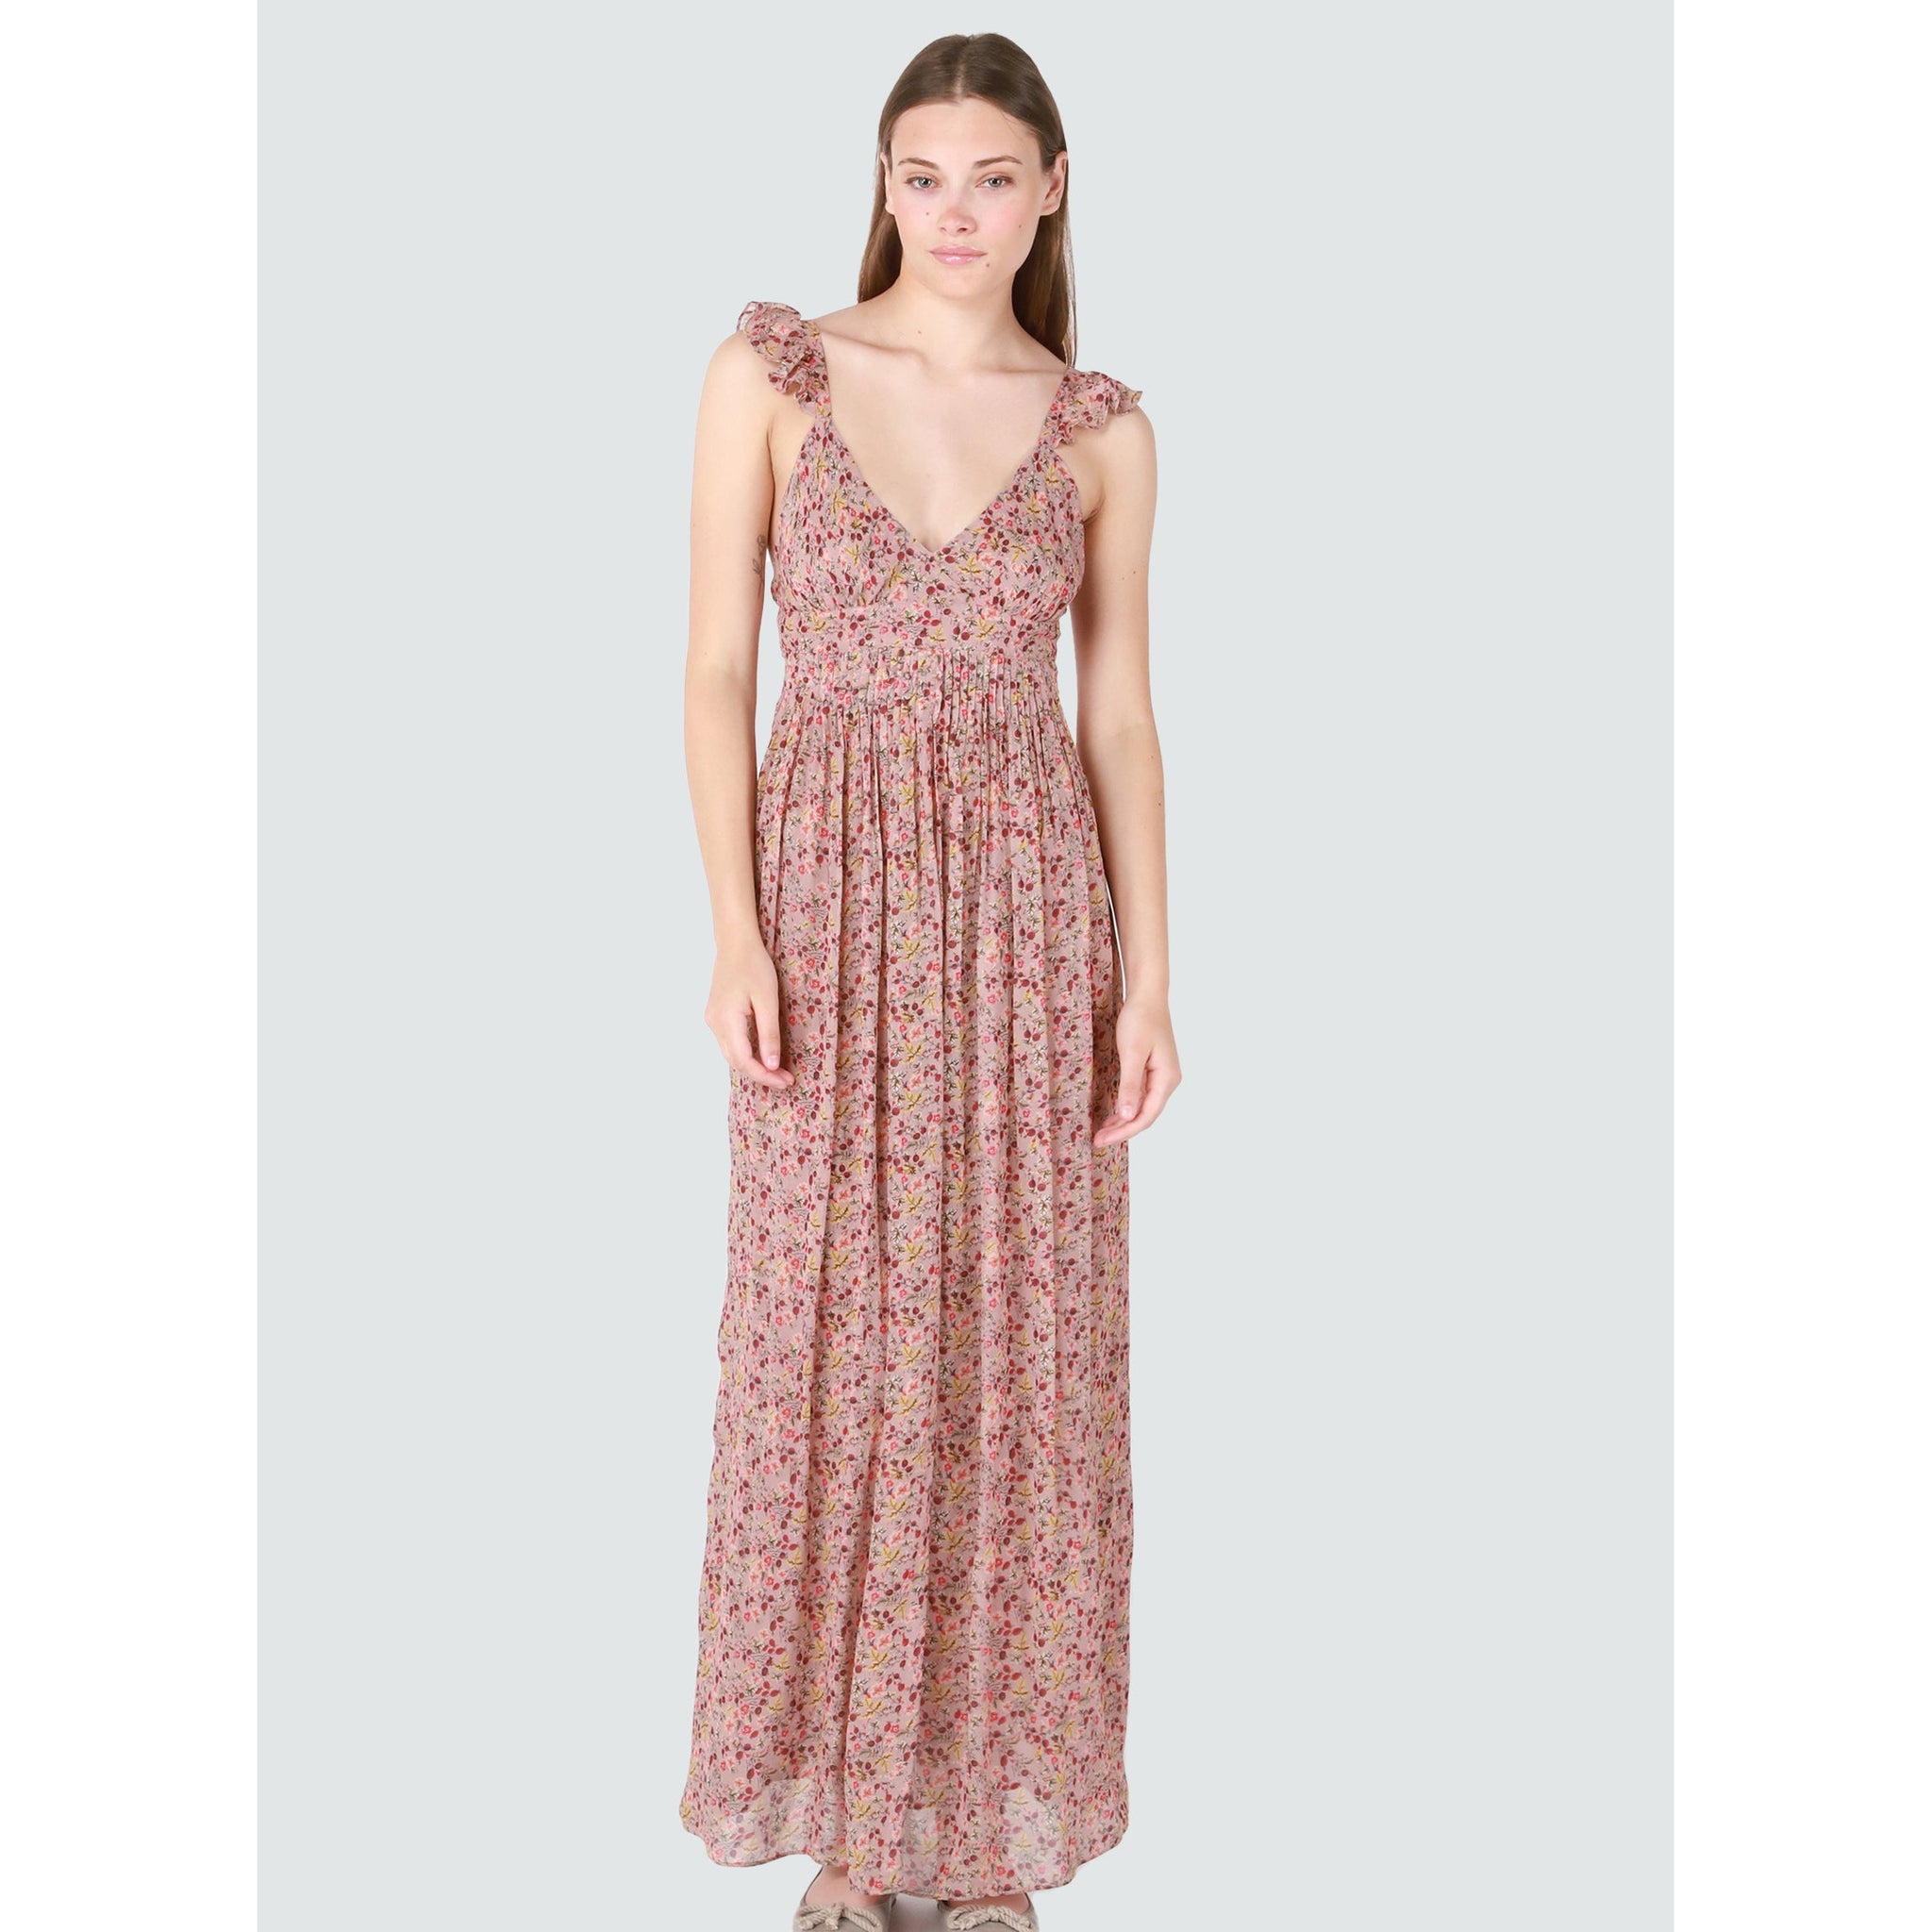 Soft Taupe Floral Maxi